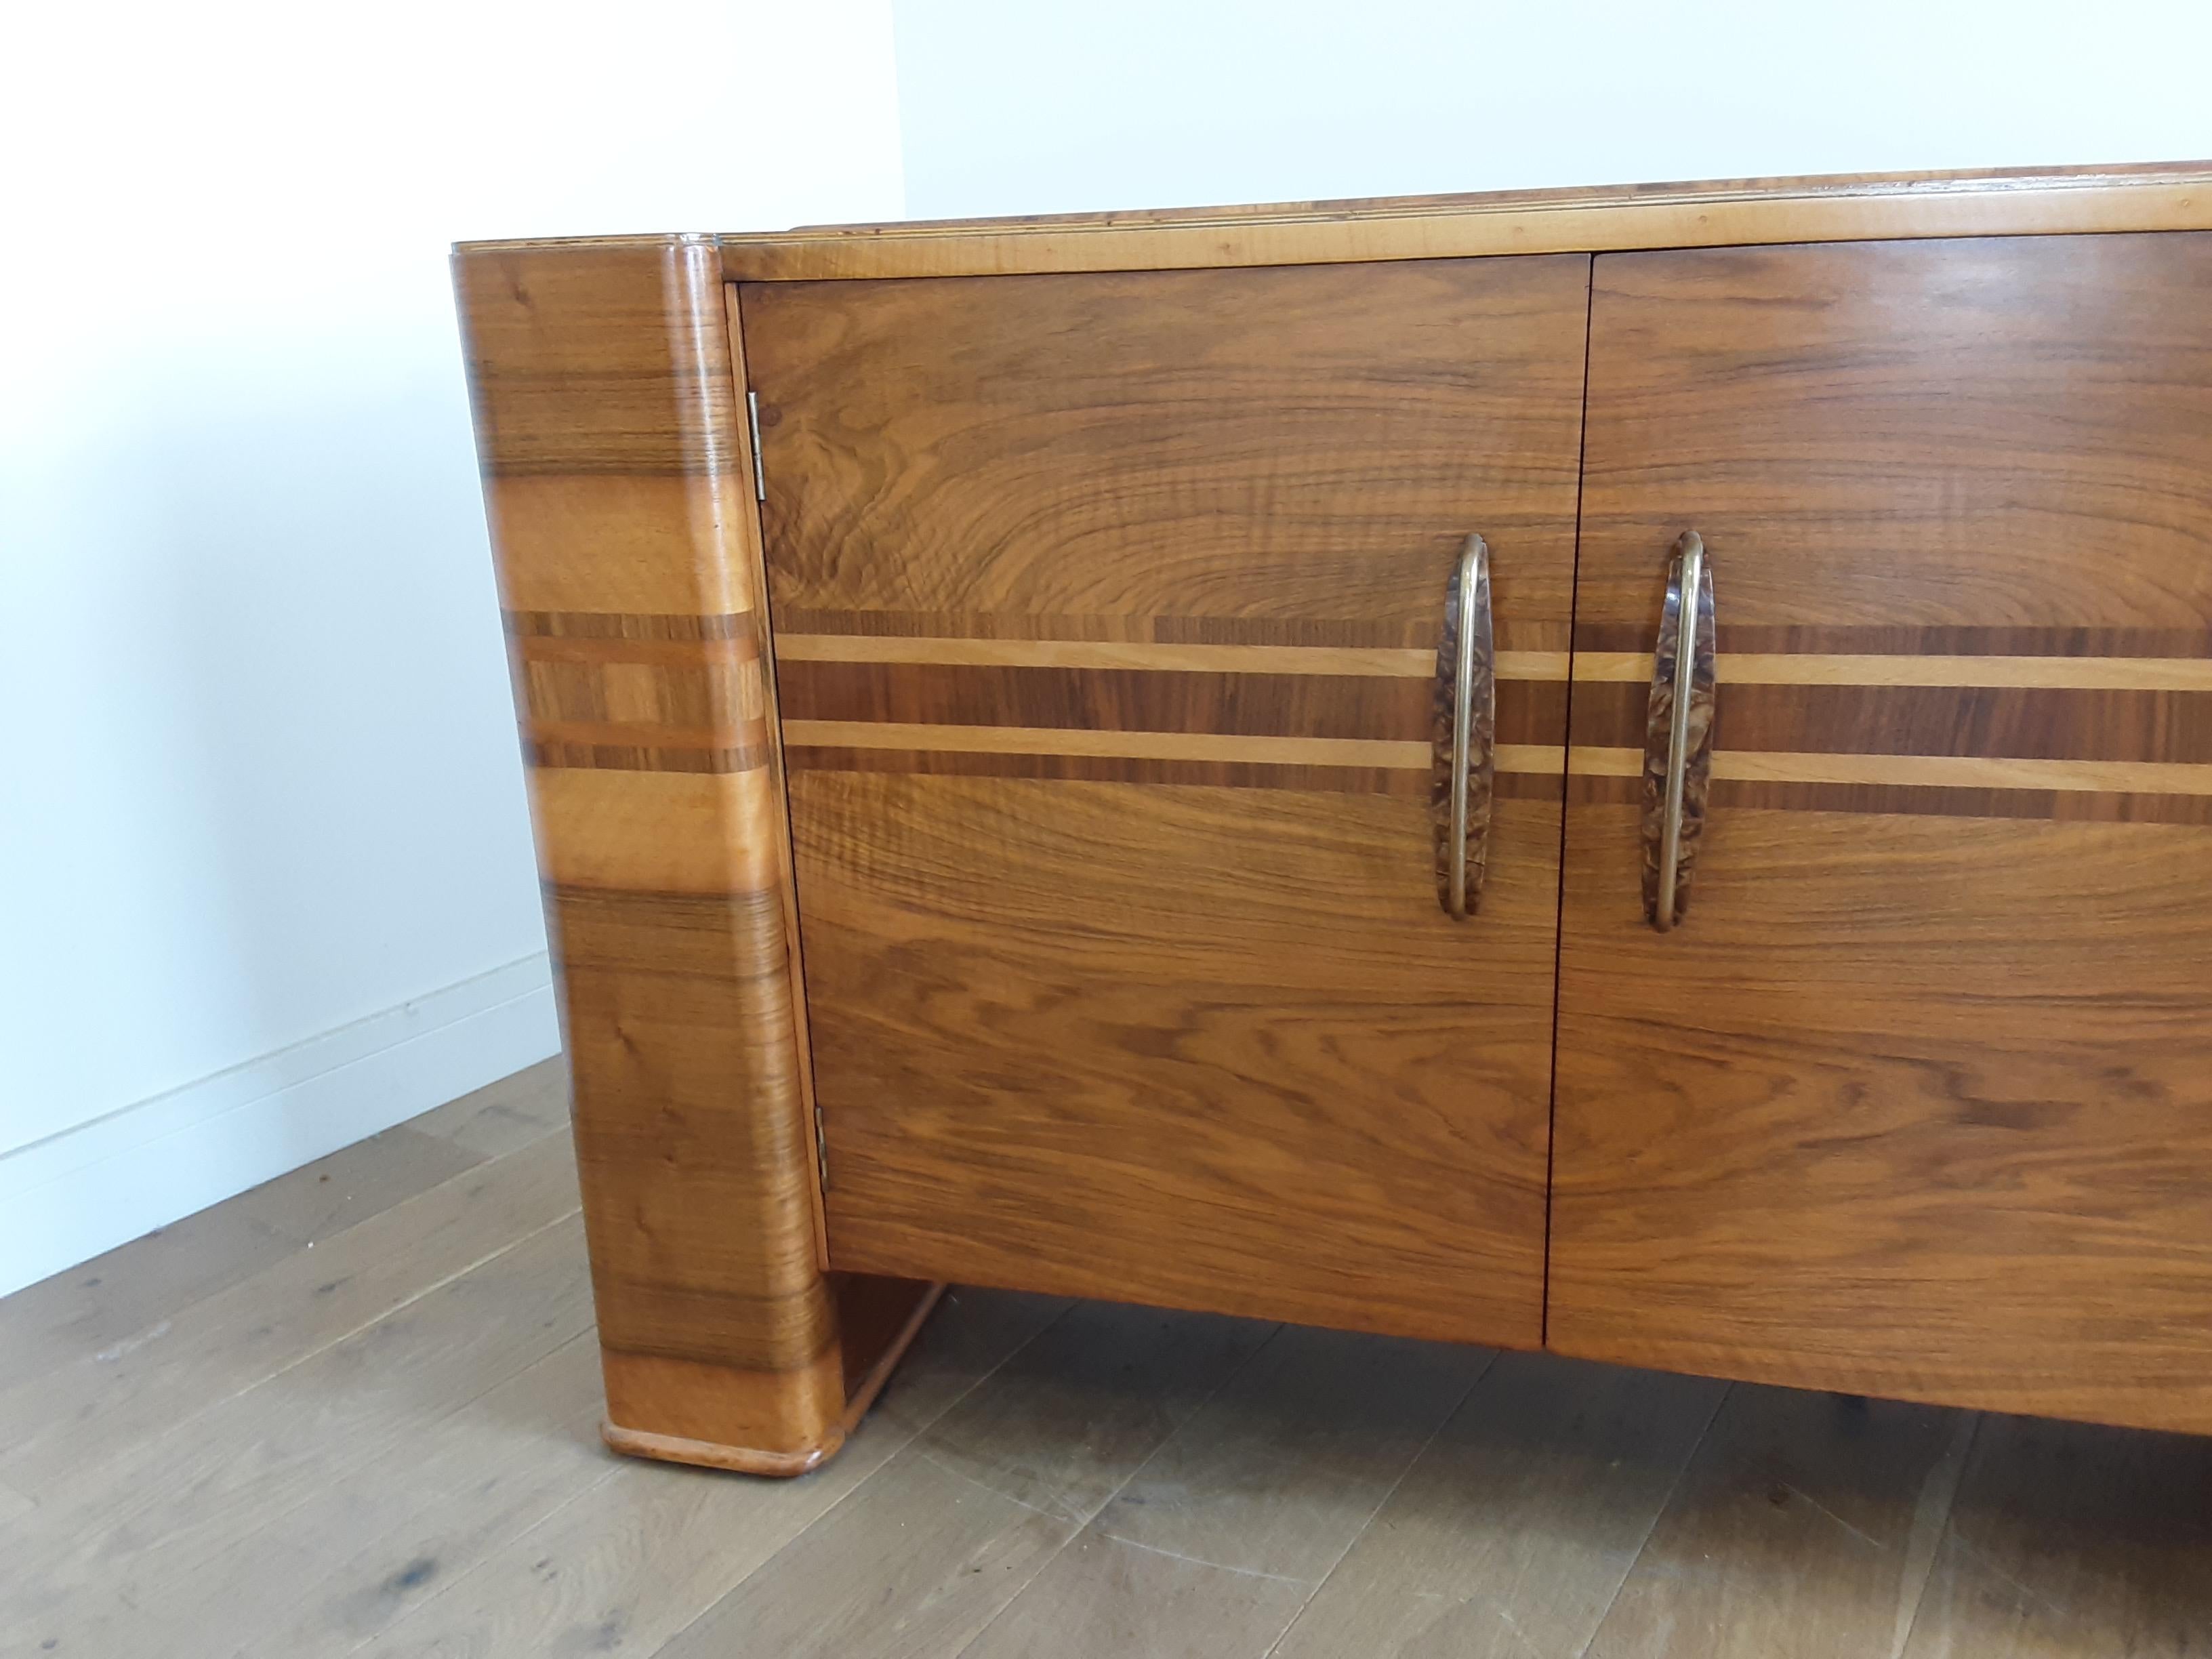 Scottish Art Deco Sideboard in a Golden Brown Walnut with a Modernist Design For Sale 3